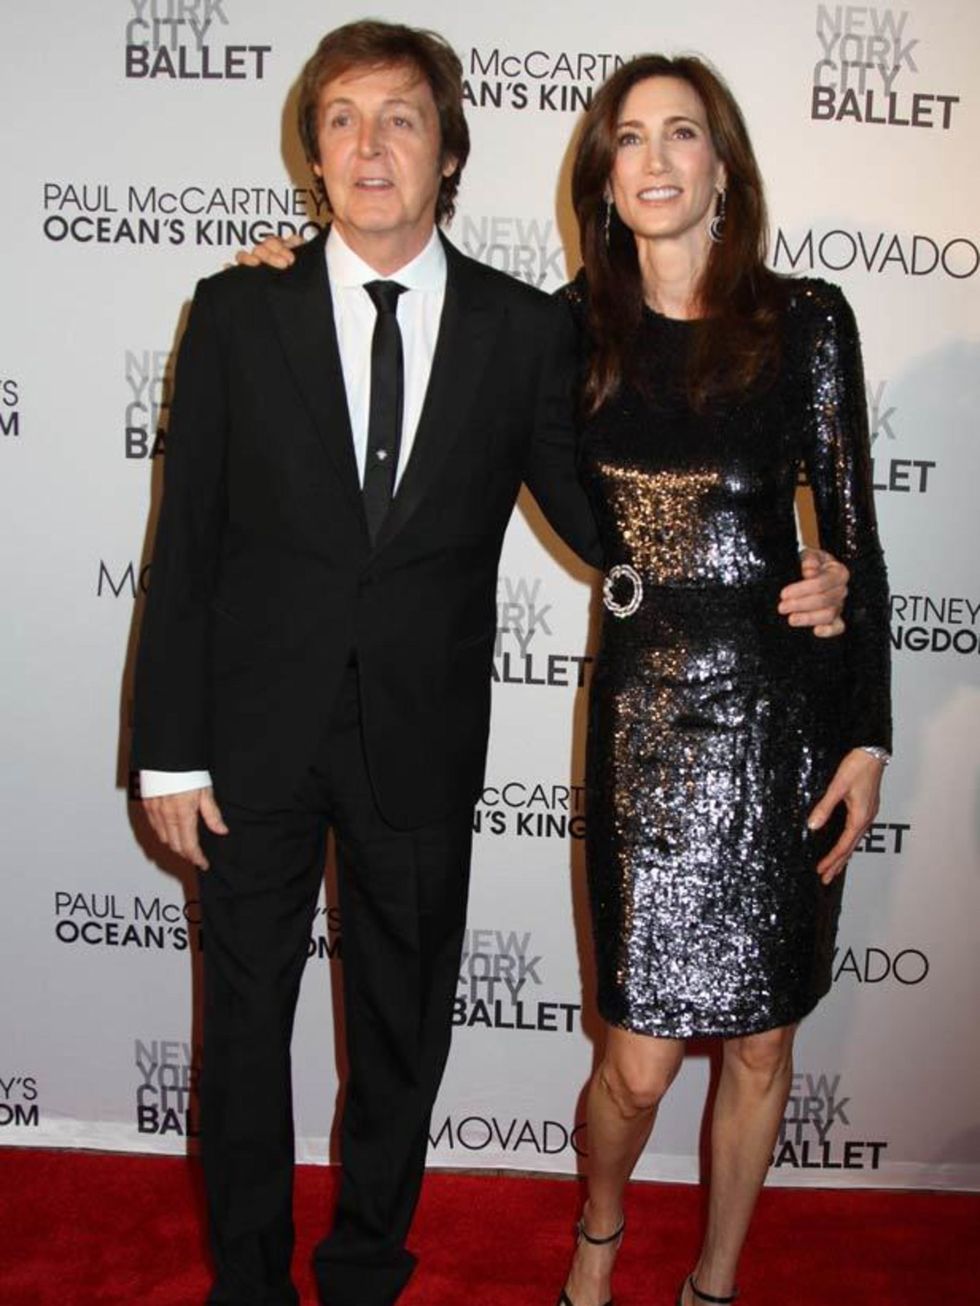 <p>Paul McCartney and Nancy Shevell attend the premiere of Ocean's Kingdom.</p>